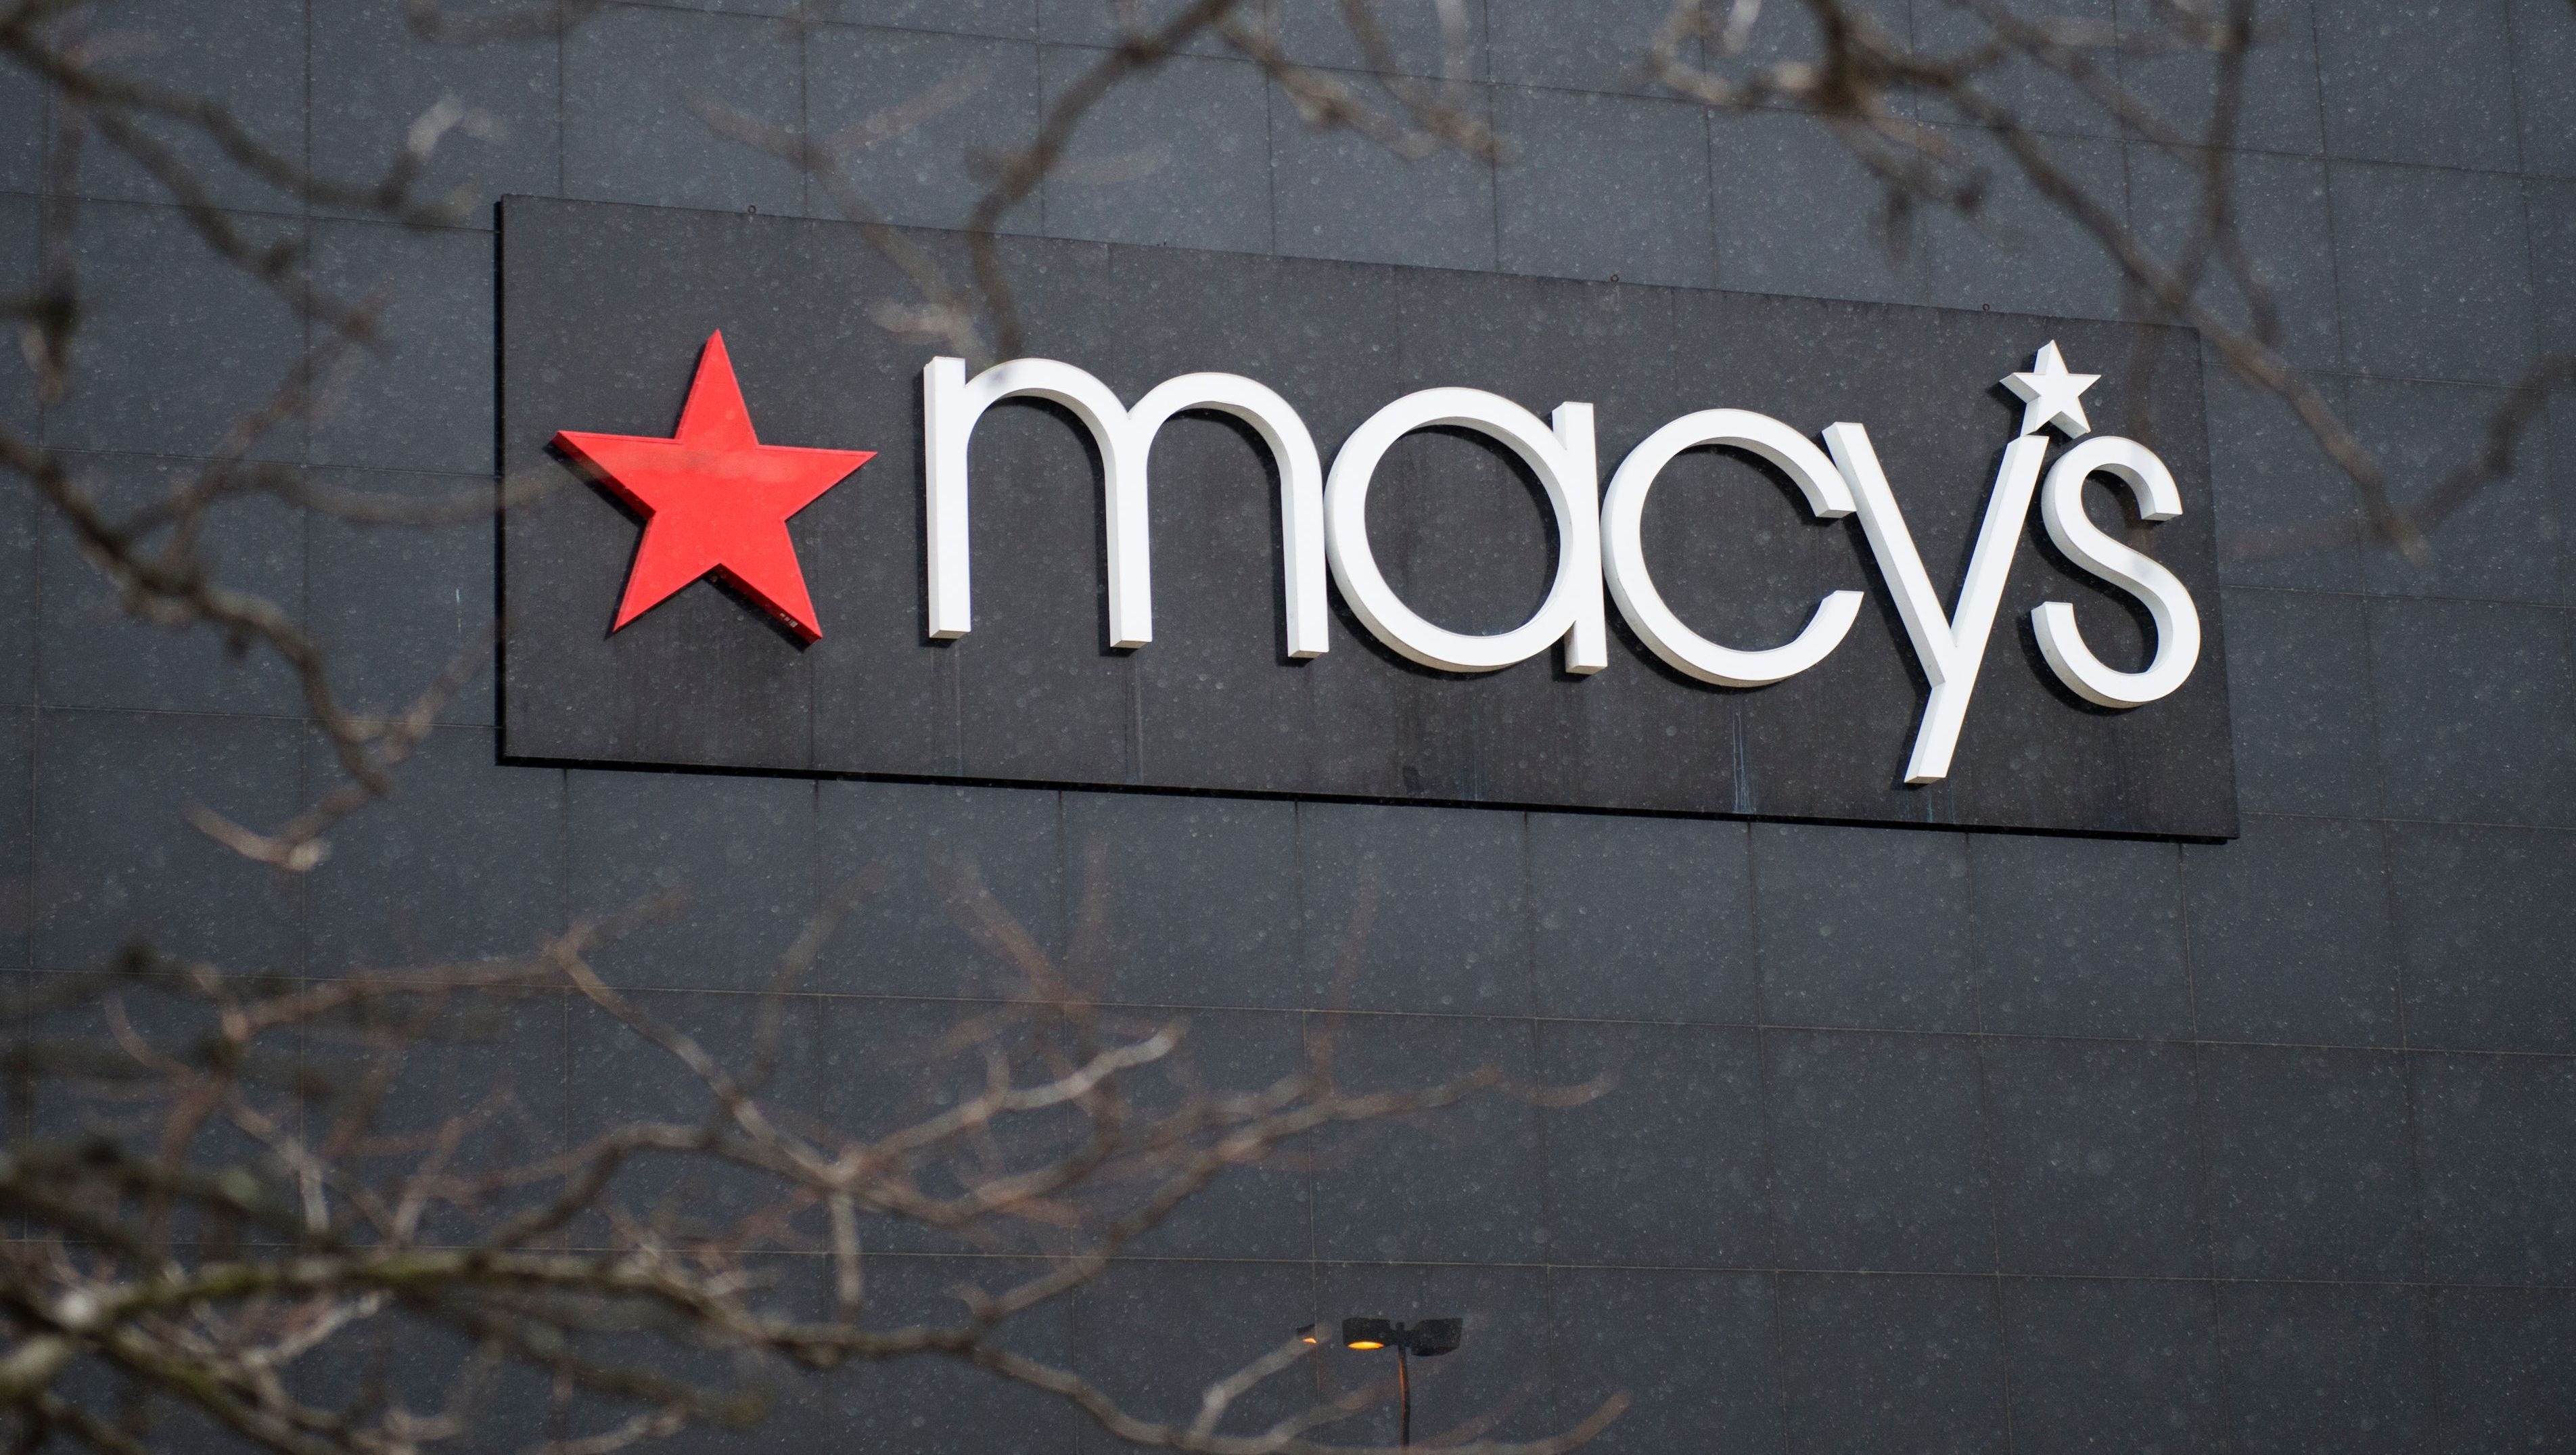 Macy’s planning to close down on a few stores as per reports – The Concepts News